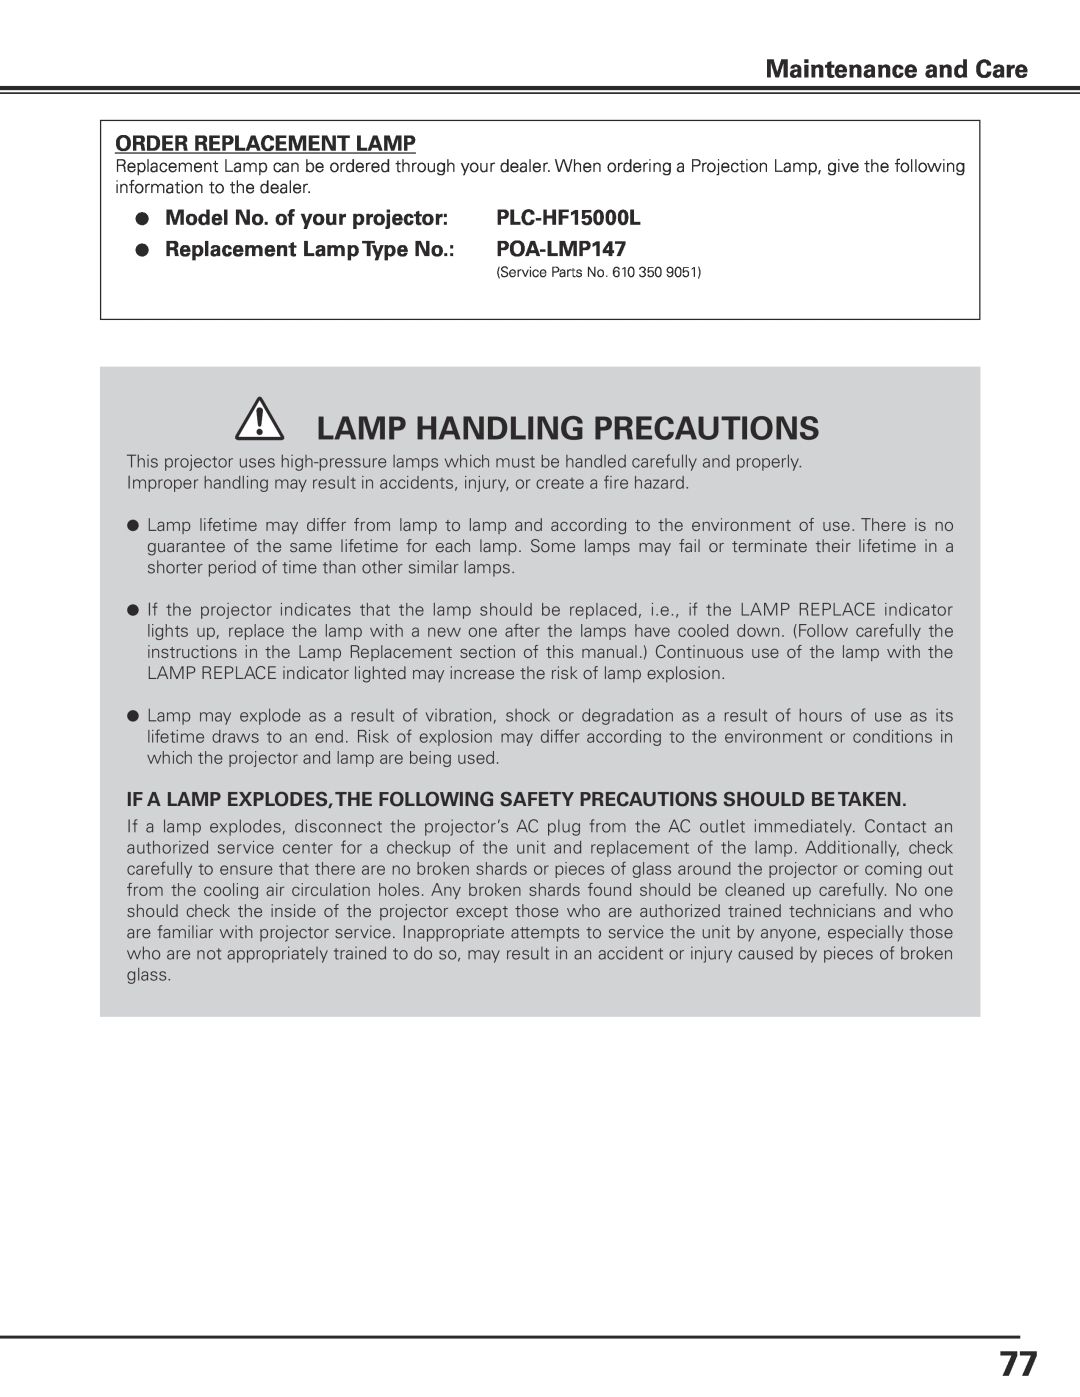 Sanyo HF15000L Lamp Handling Precautions, Maintenance and Care, Order Replacement Lamp, Model No. of your projector 